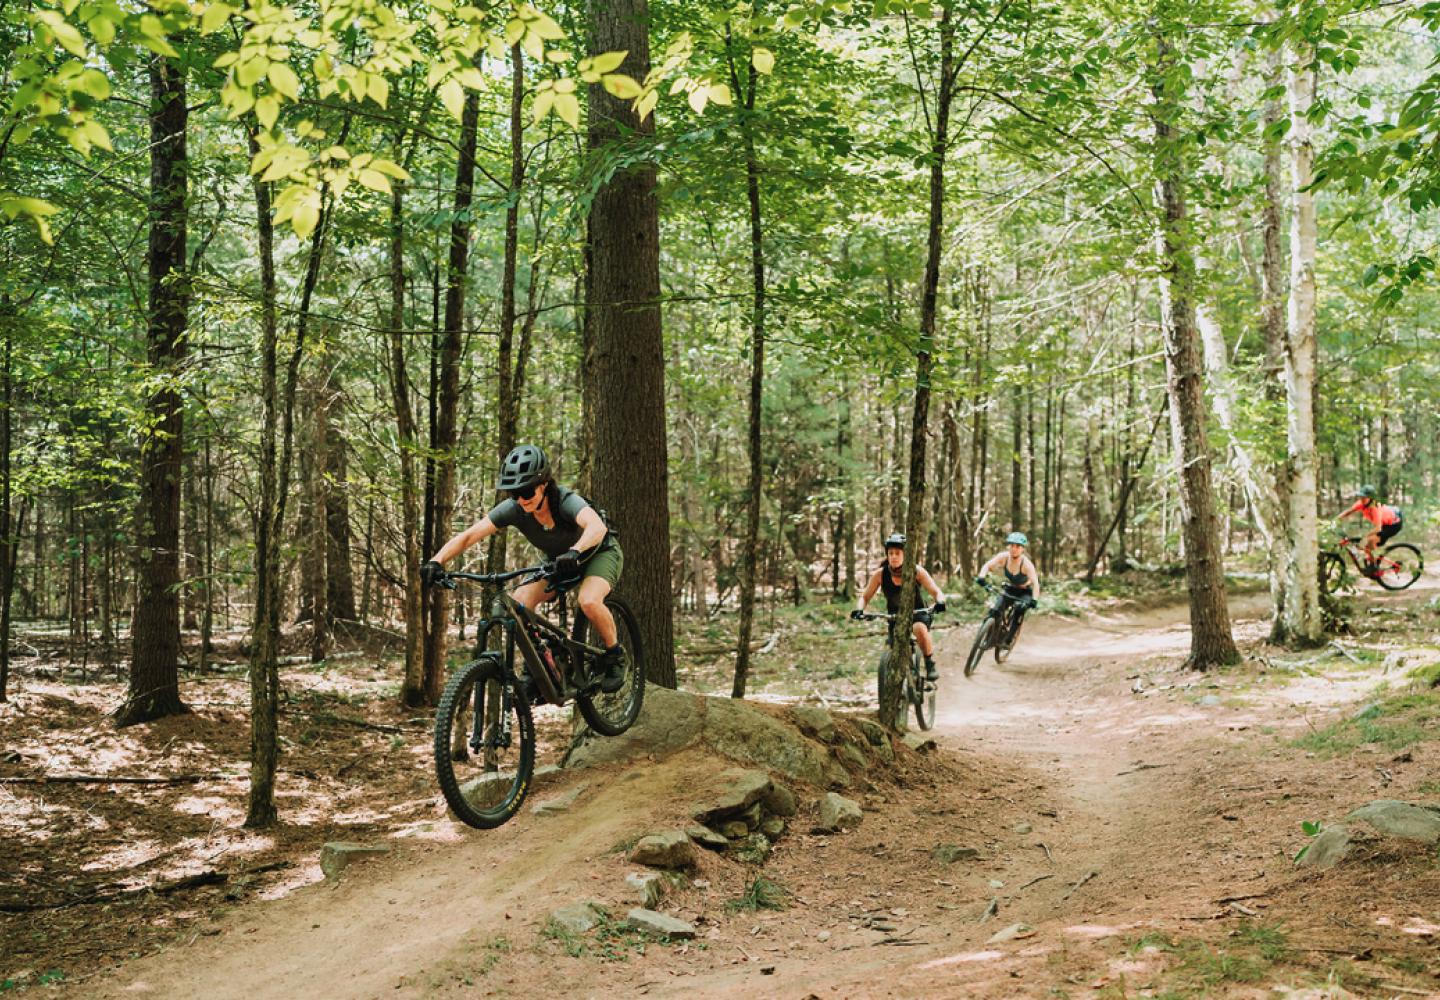 Wilmington Mountain Bike Festival is the biggest annual fundraiser for the Barkeater Trails Alliance.